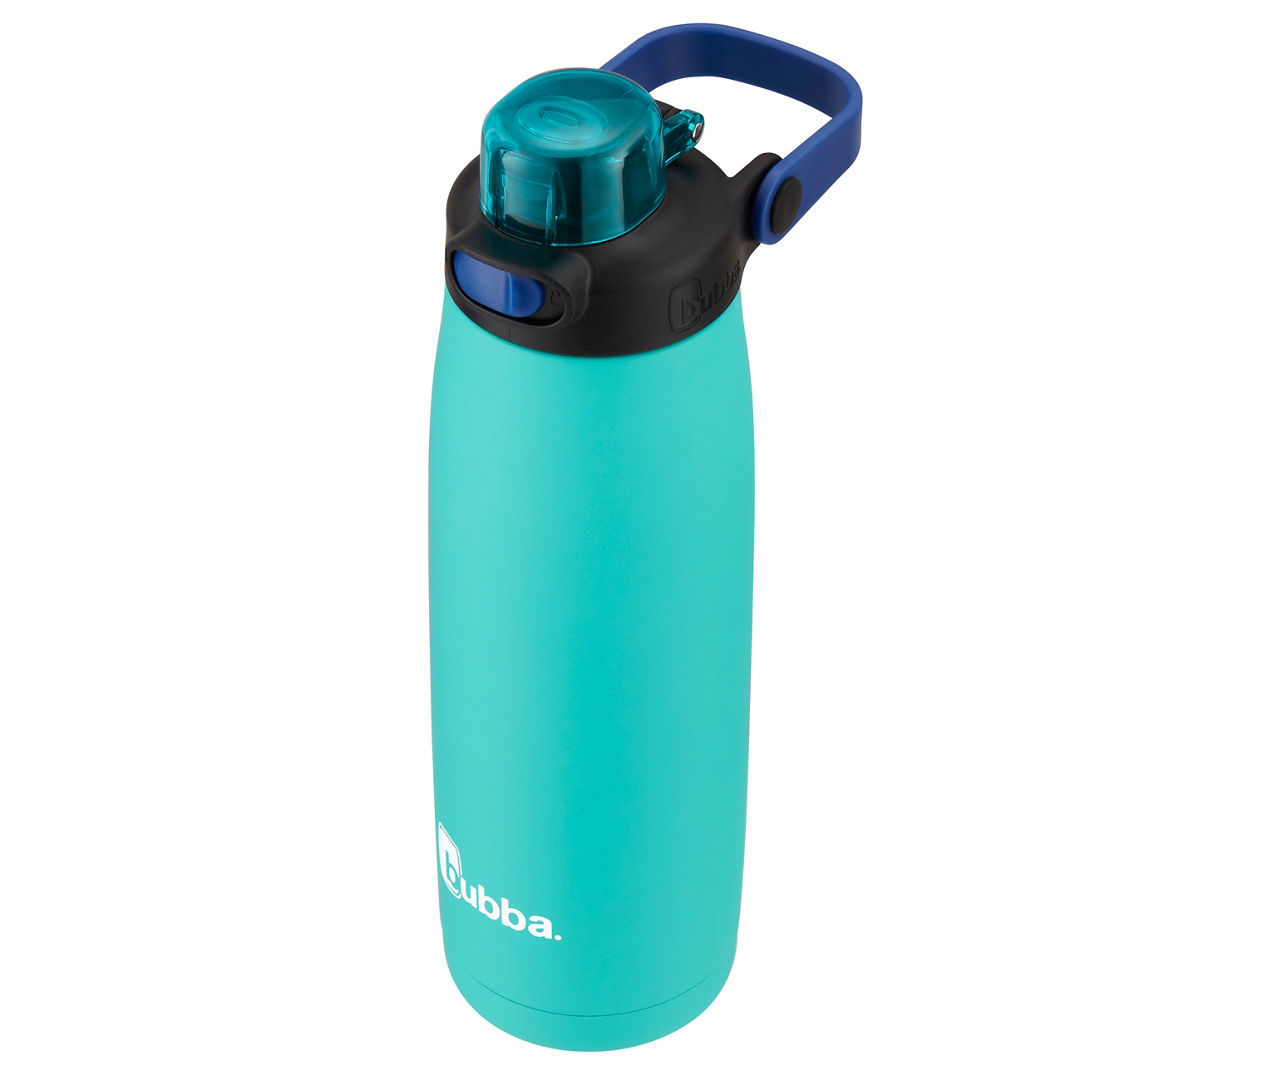 Bubba Teal Radiant Chug Stainless Steel Water Bottle, 24 Oz.